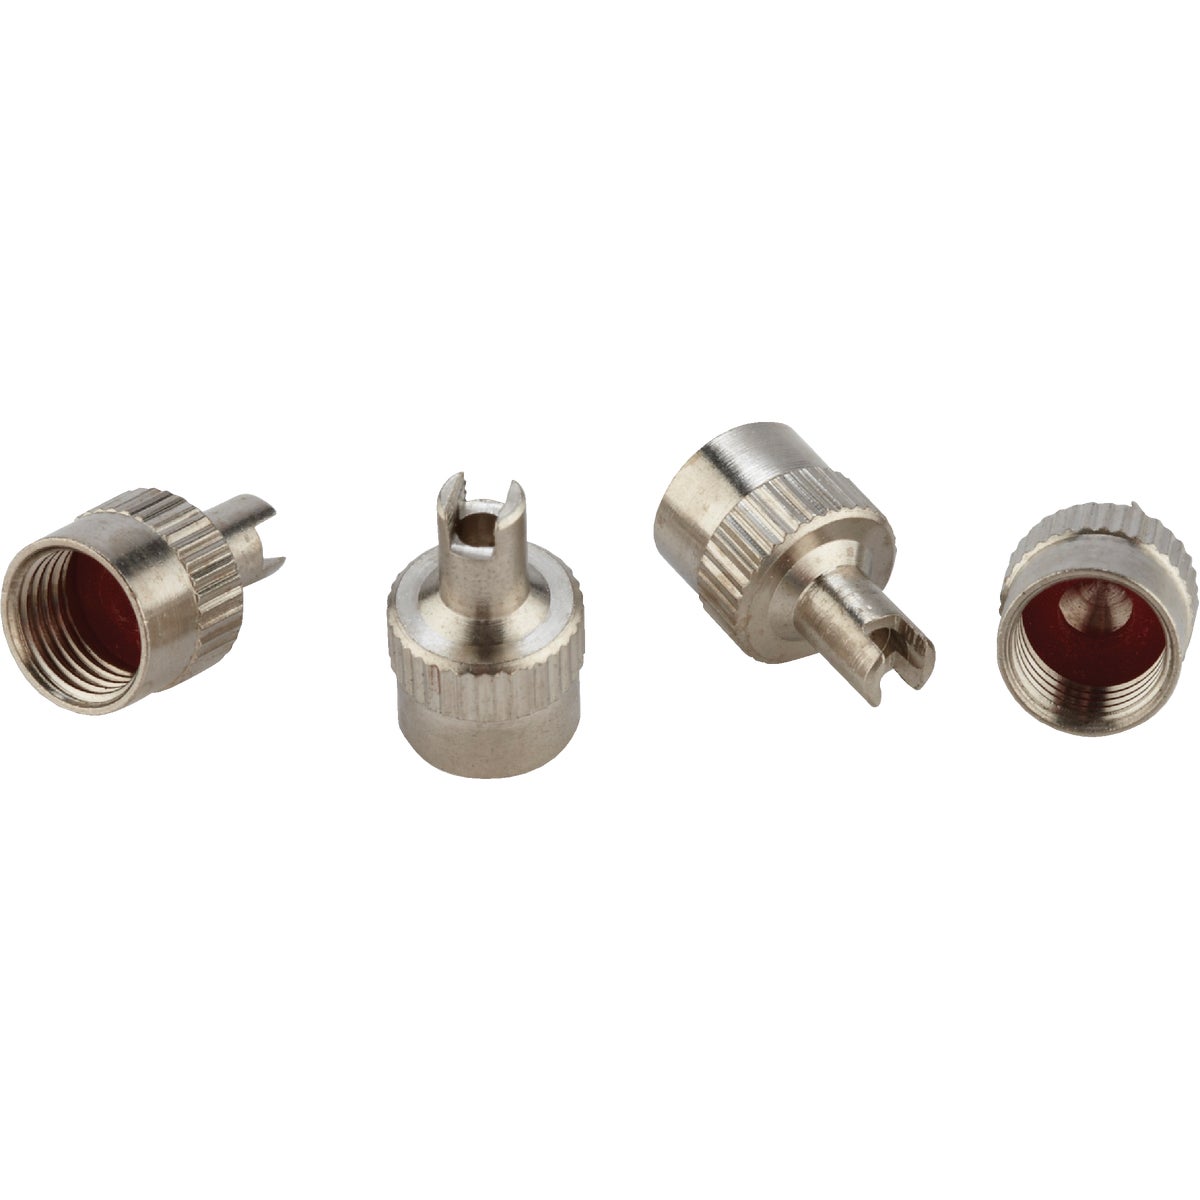 Item 571802, All-purpose cap with screwdriver for removing and inserting valve cores.